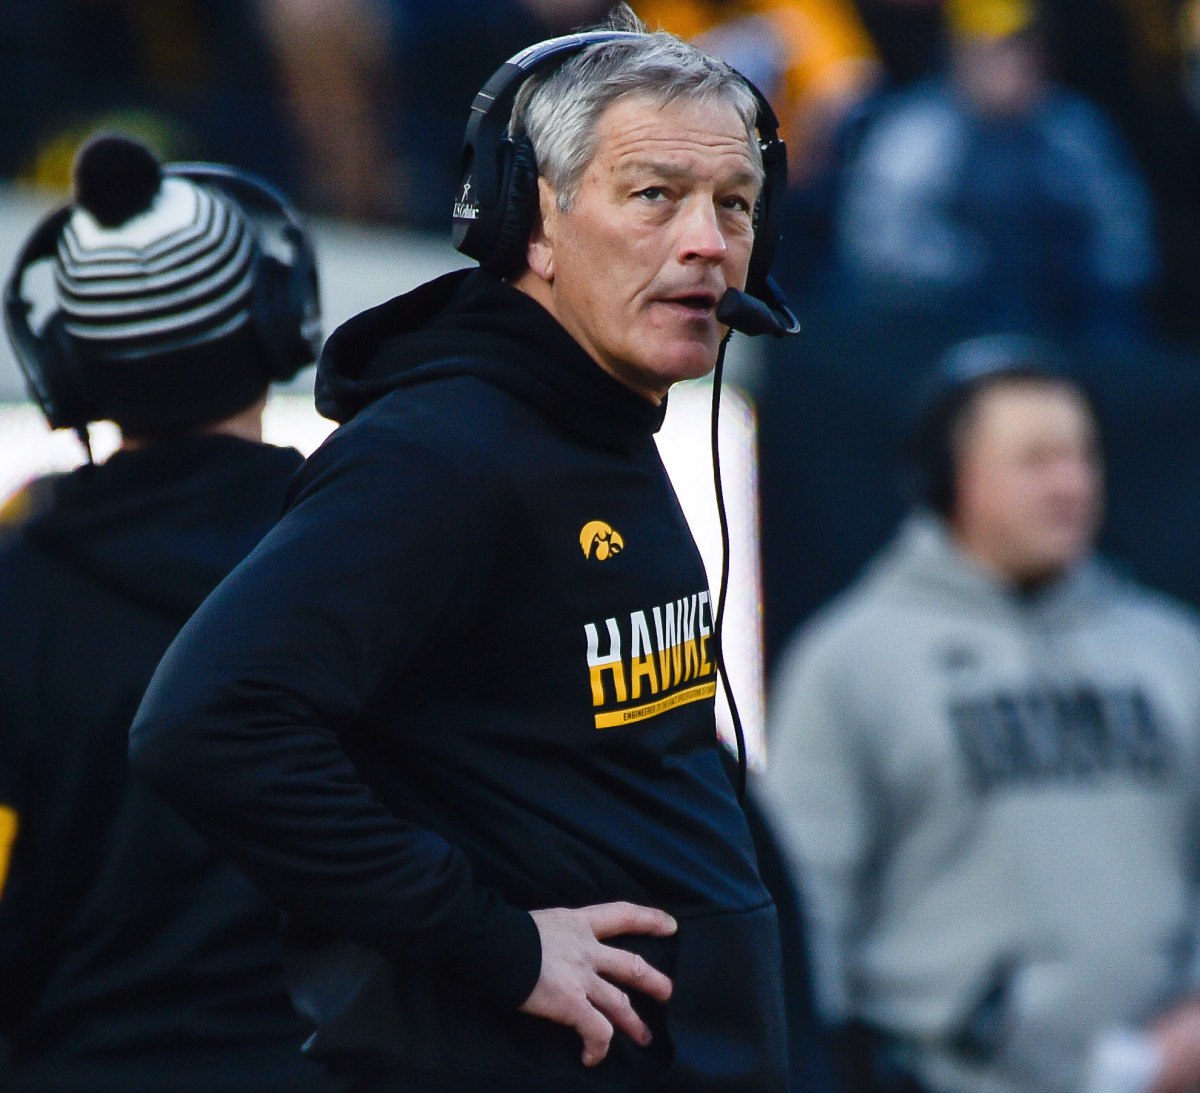 Iowa coach Kirk Ferentz spoke of the recruiting process, and the relationships he builds with players.